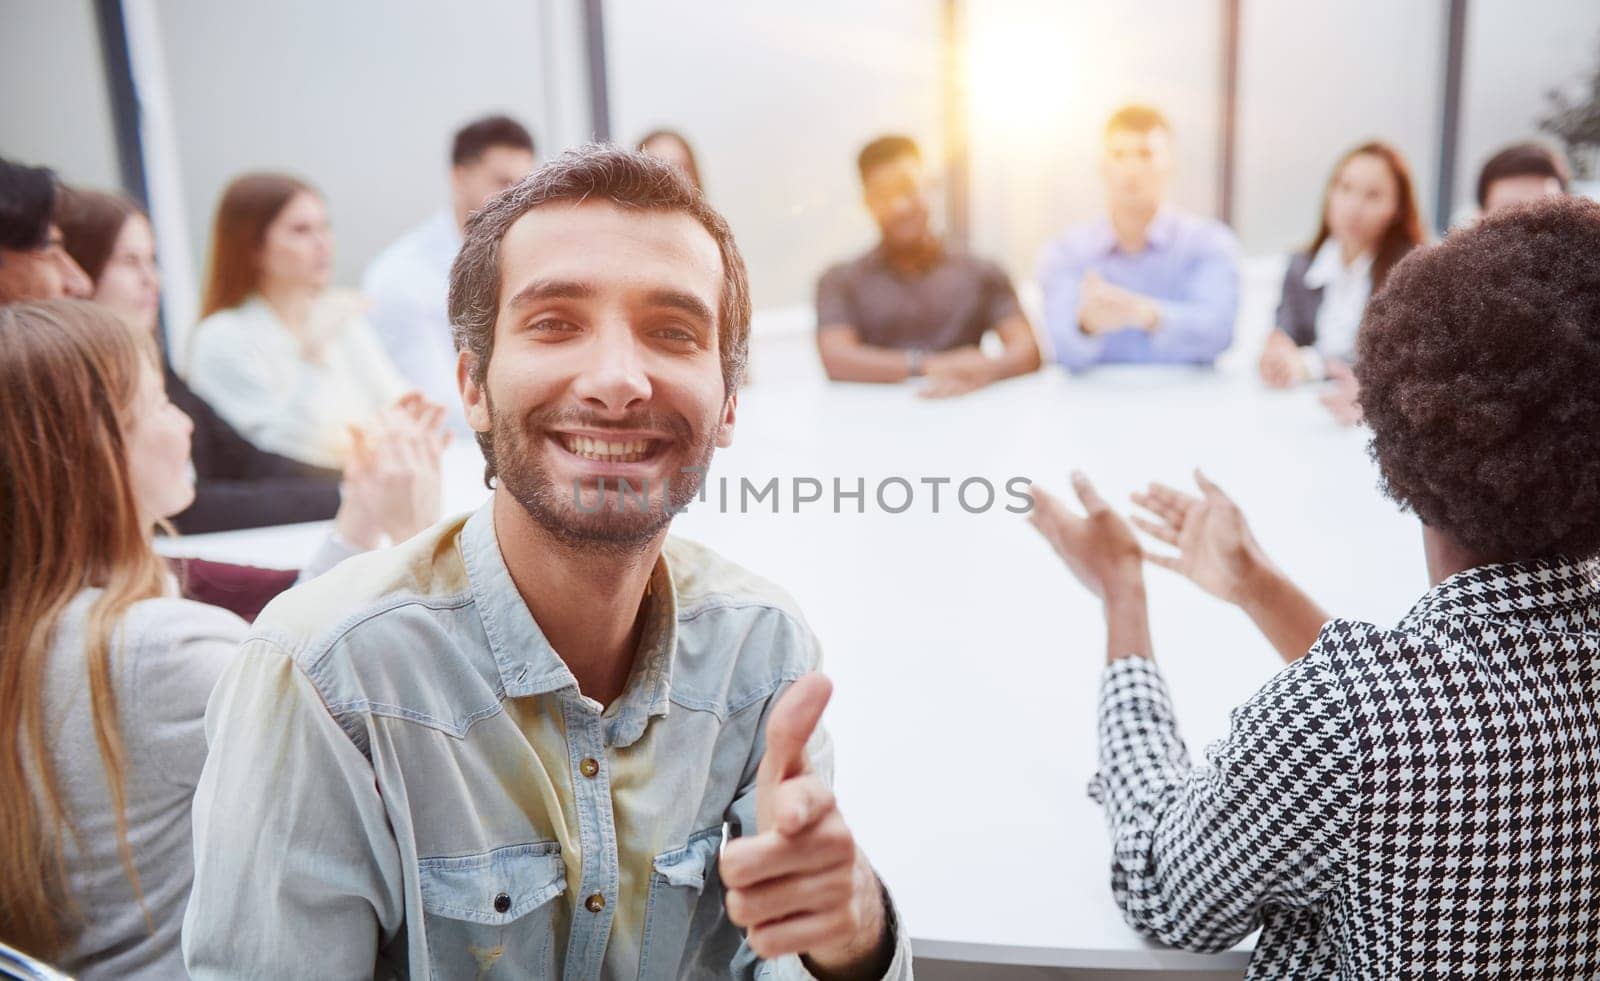 Smiling business group of office workers, executive board members or employees looking at camera sitting at conference table